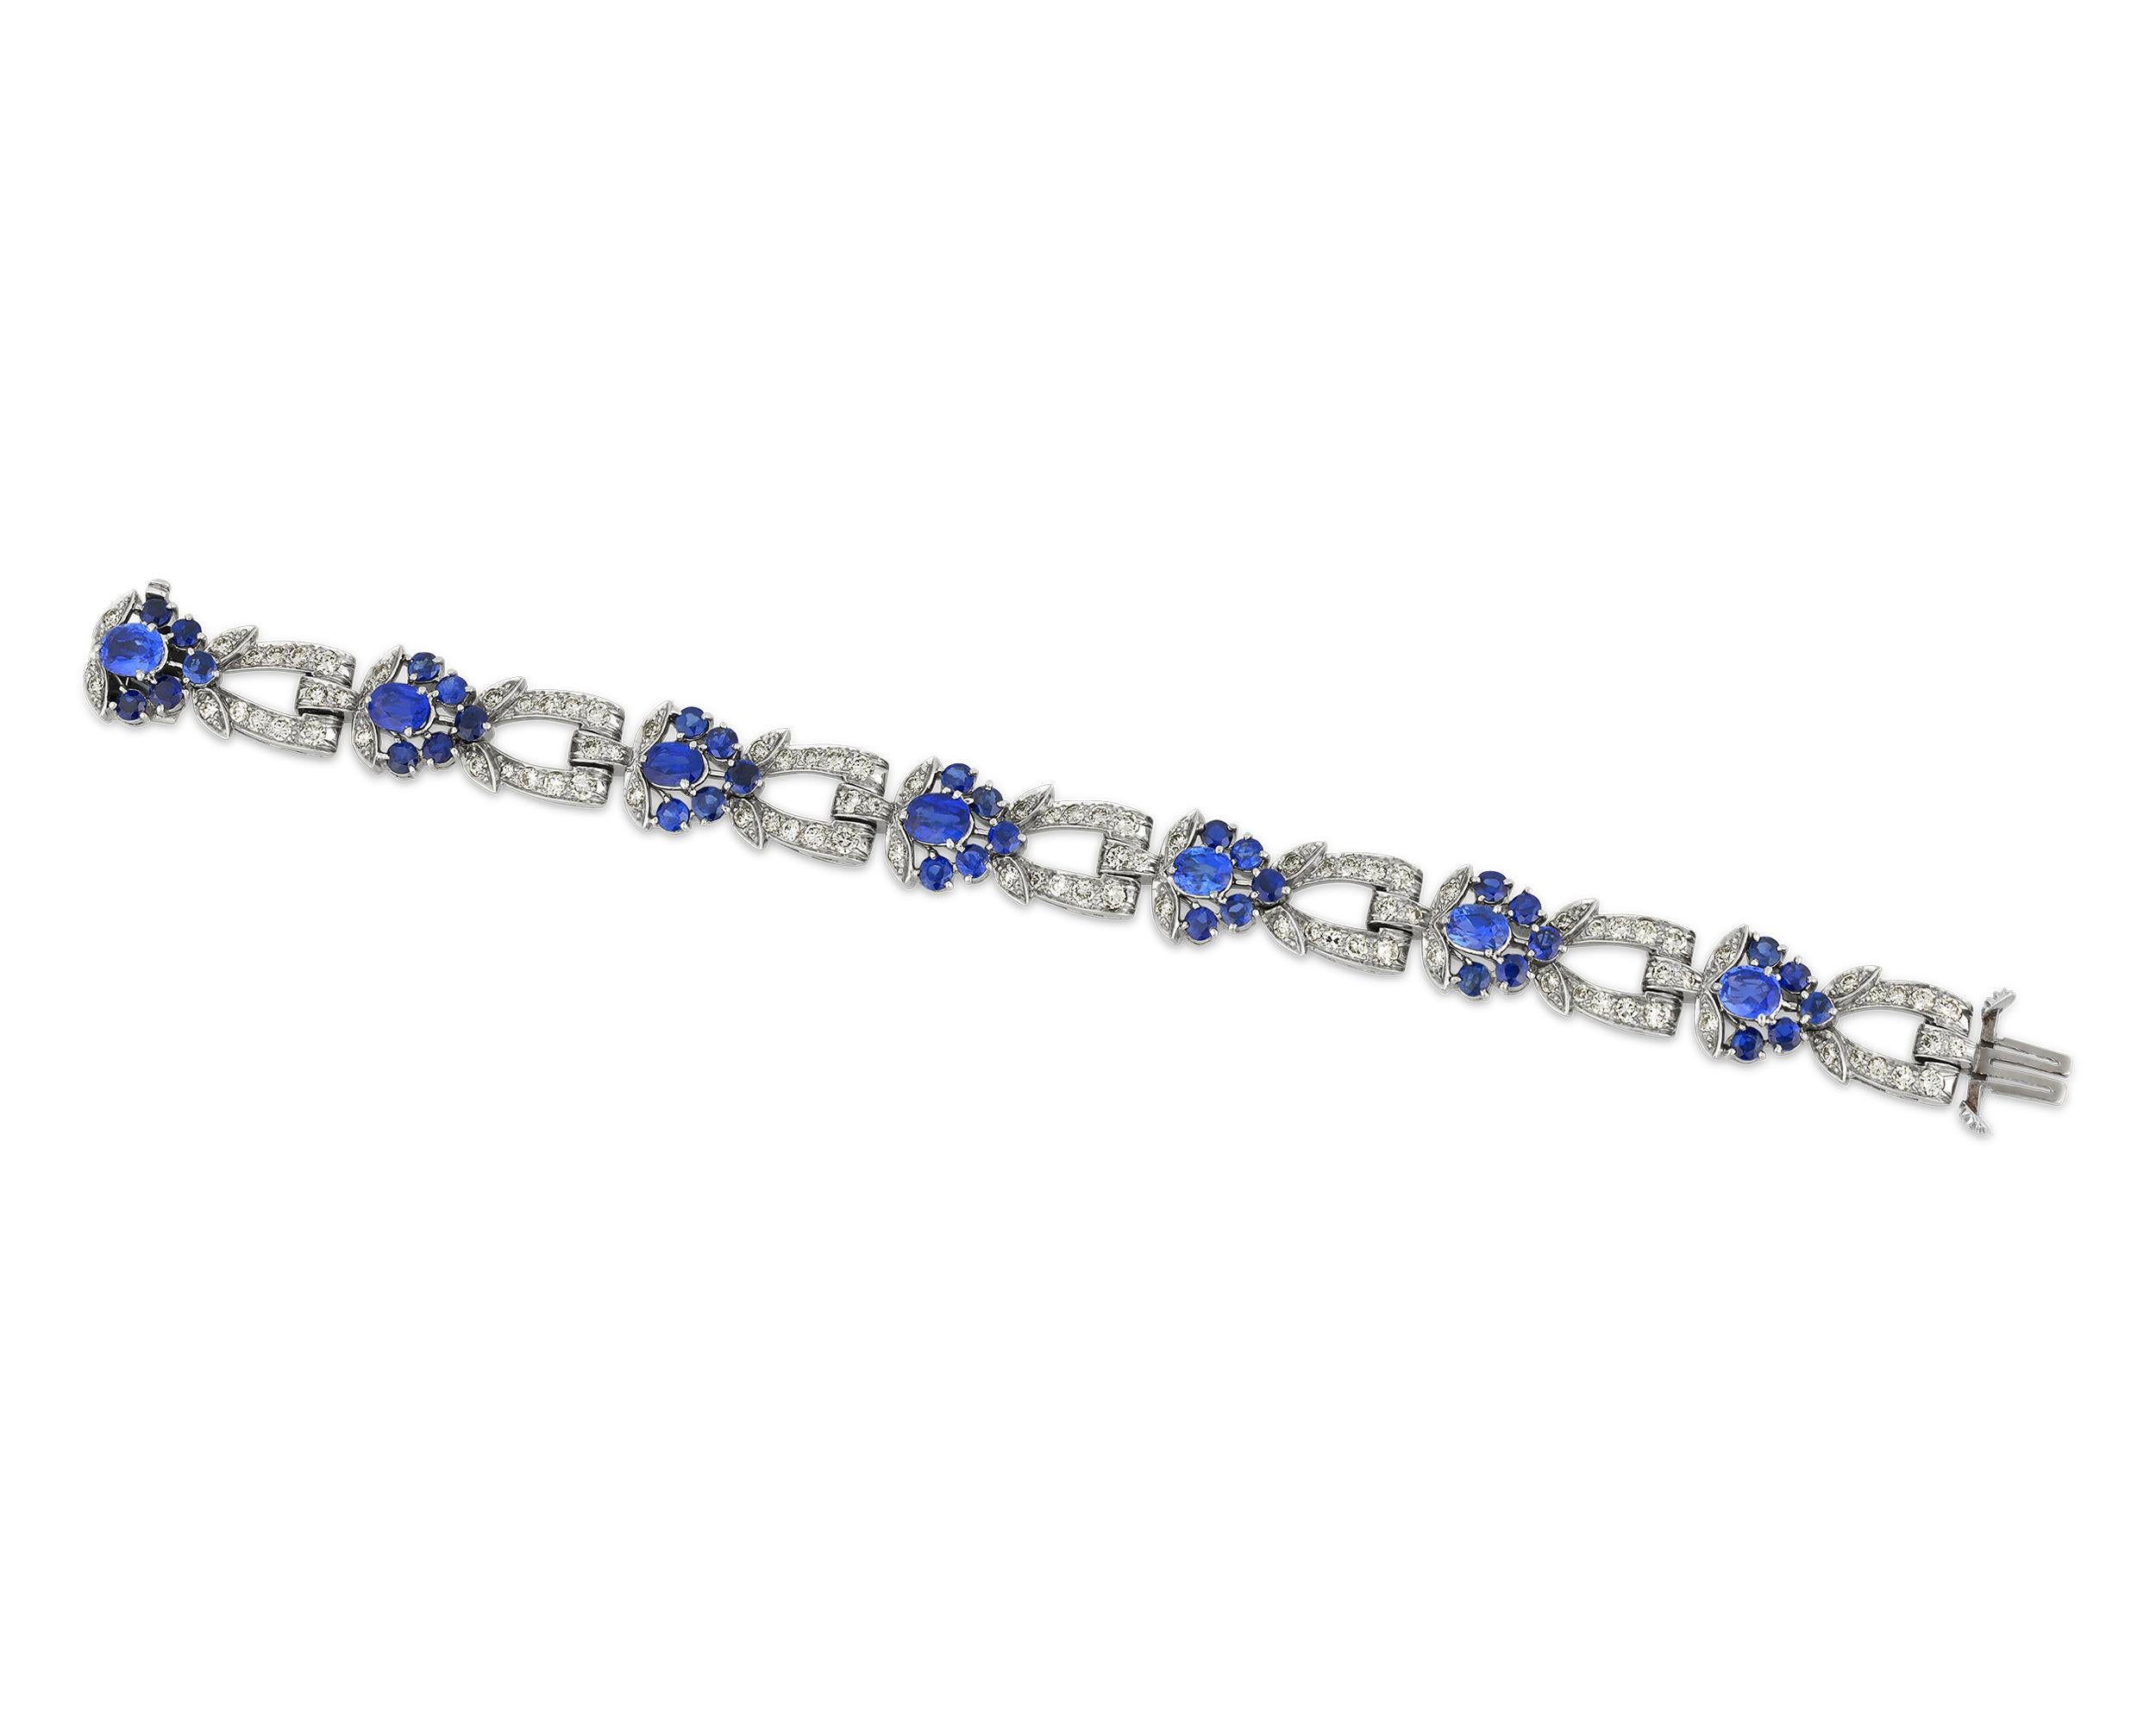 This stunning bracelet from iconic jeweler Tiffany & Co. features dazzling blue oval mixed-cut sapphires totaling 7.90 carats. The beautiful blue sapphires are certified by the American Gemological Laboratories as being of the coveted Burmese